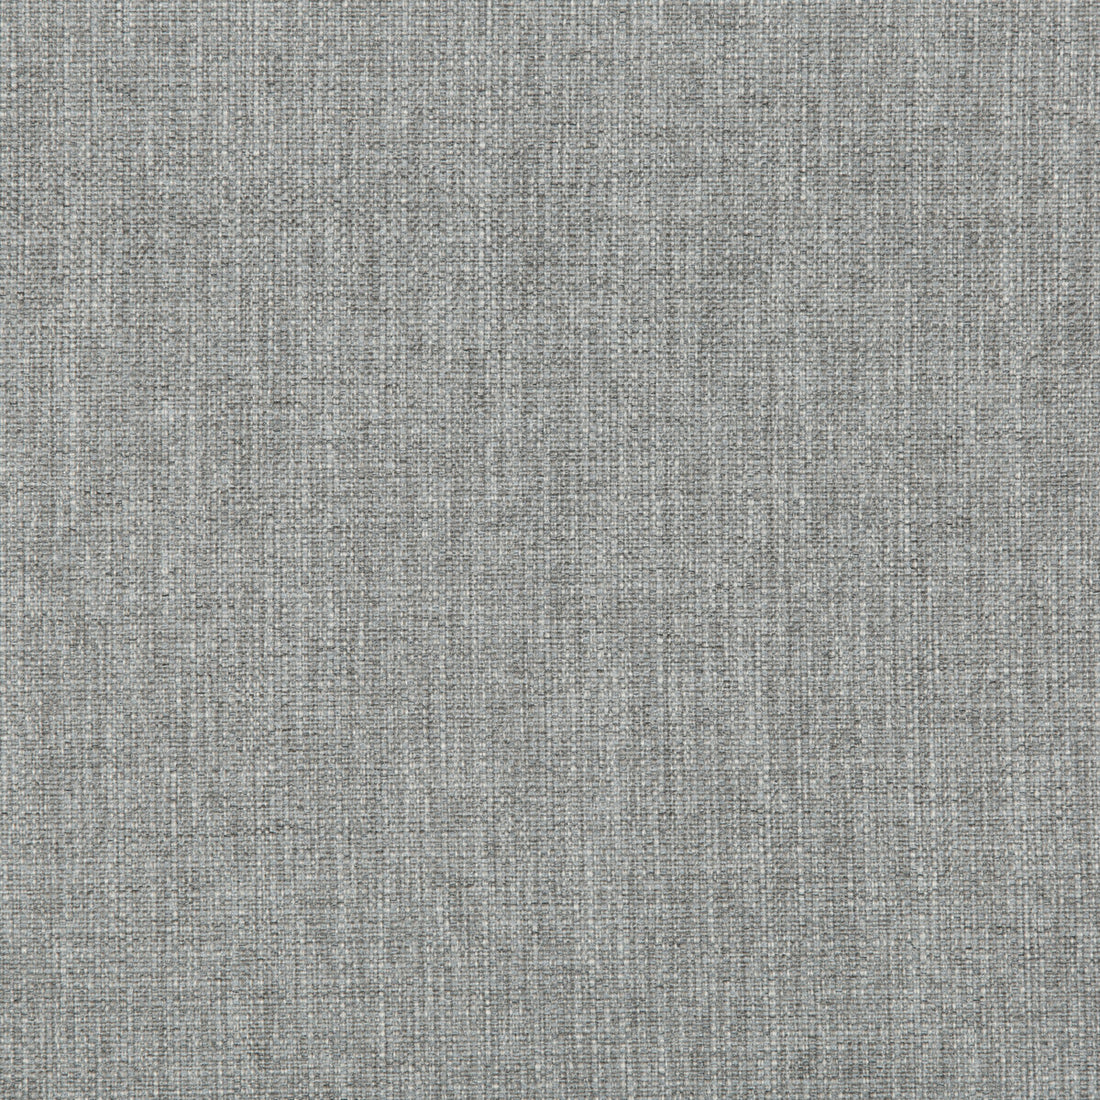 Kravet Contract fabric in 35443-1511 color - pattern 35443.1511.0 - by Kravet Contract